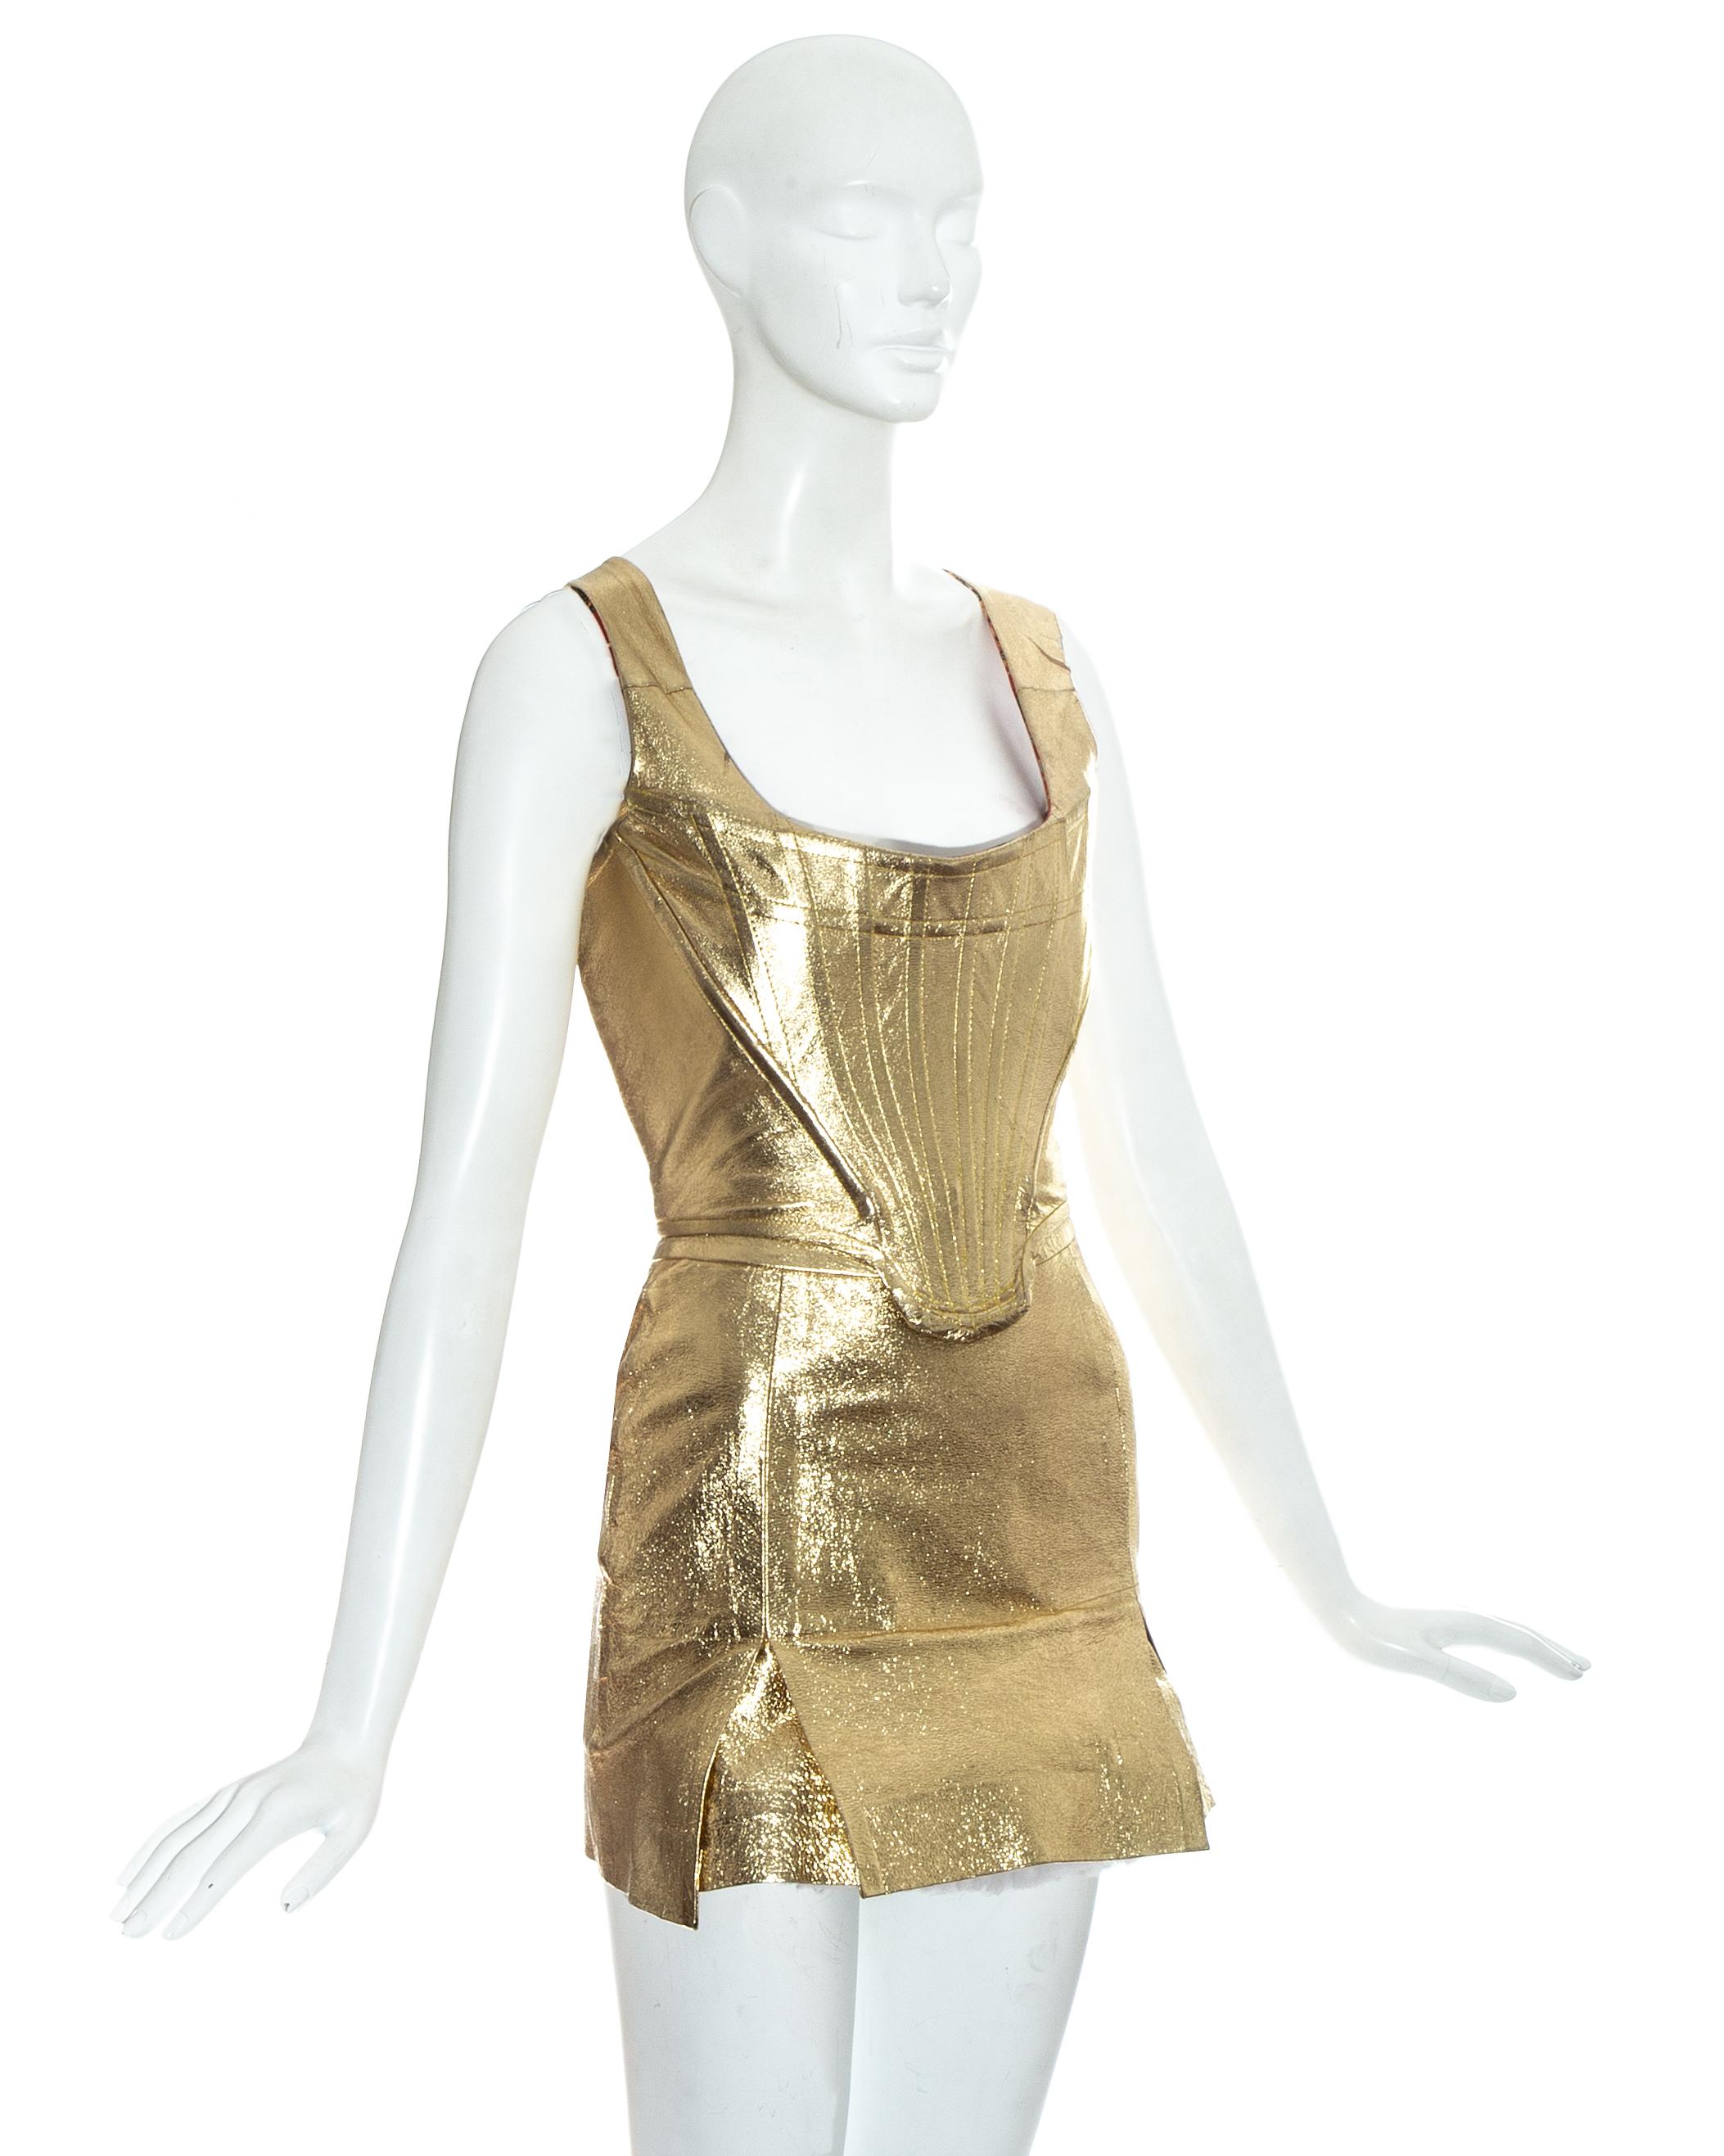 Vivienne Westwood gold leather corset and mini skirt, 'Time Machine' ss 1988 In Good Condition For Sale In London, London